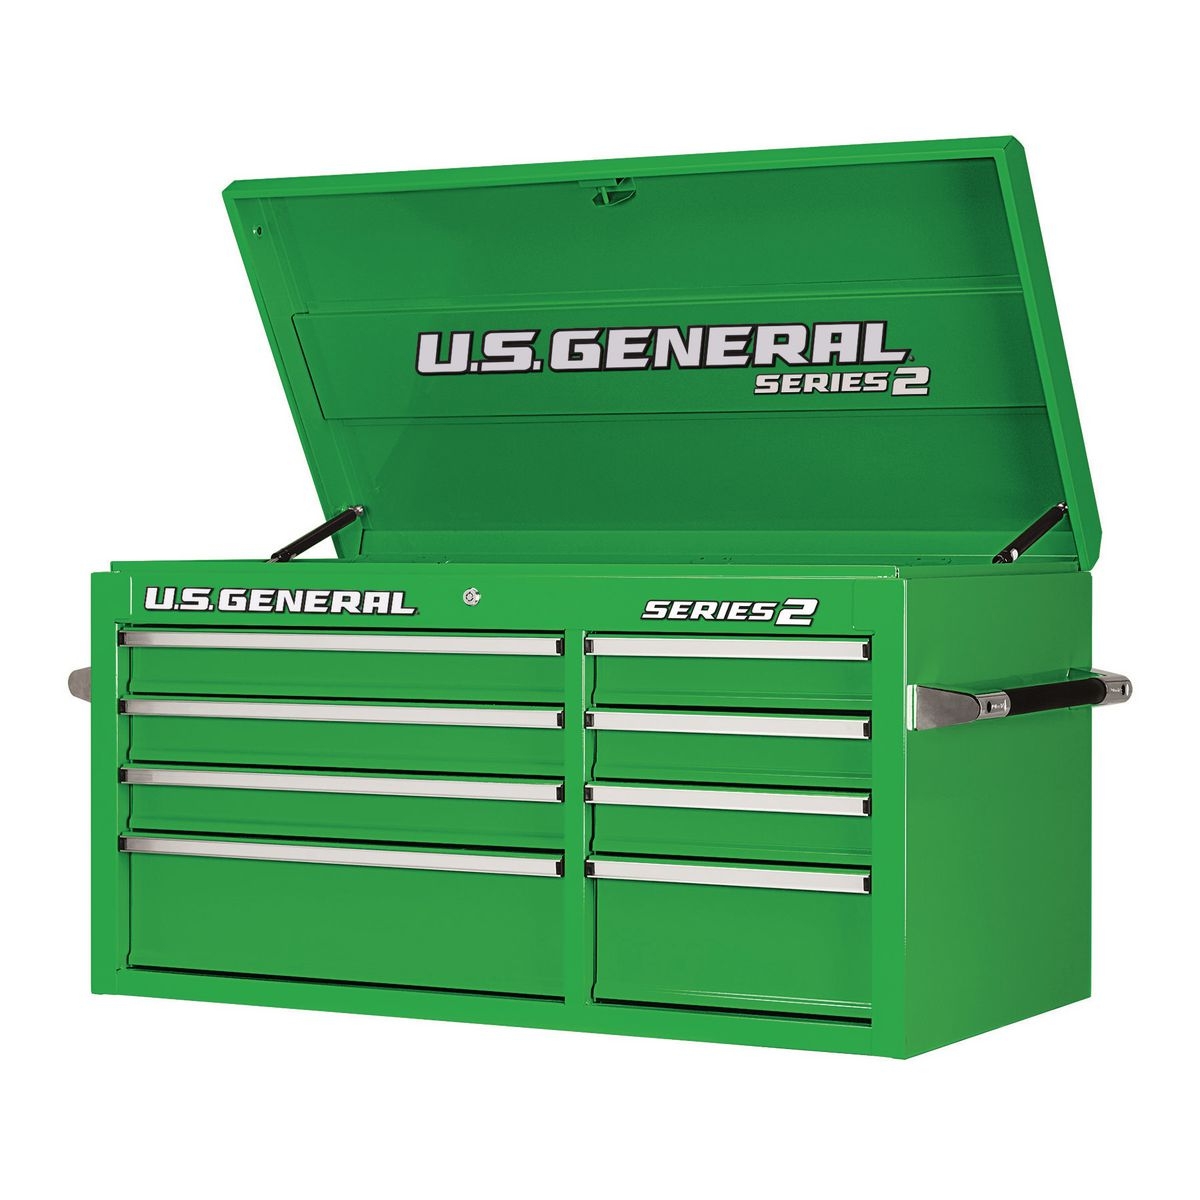 U.S. GENERAL 44 in. Double Bank Green Top Chest - Item 64957